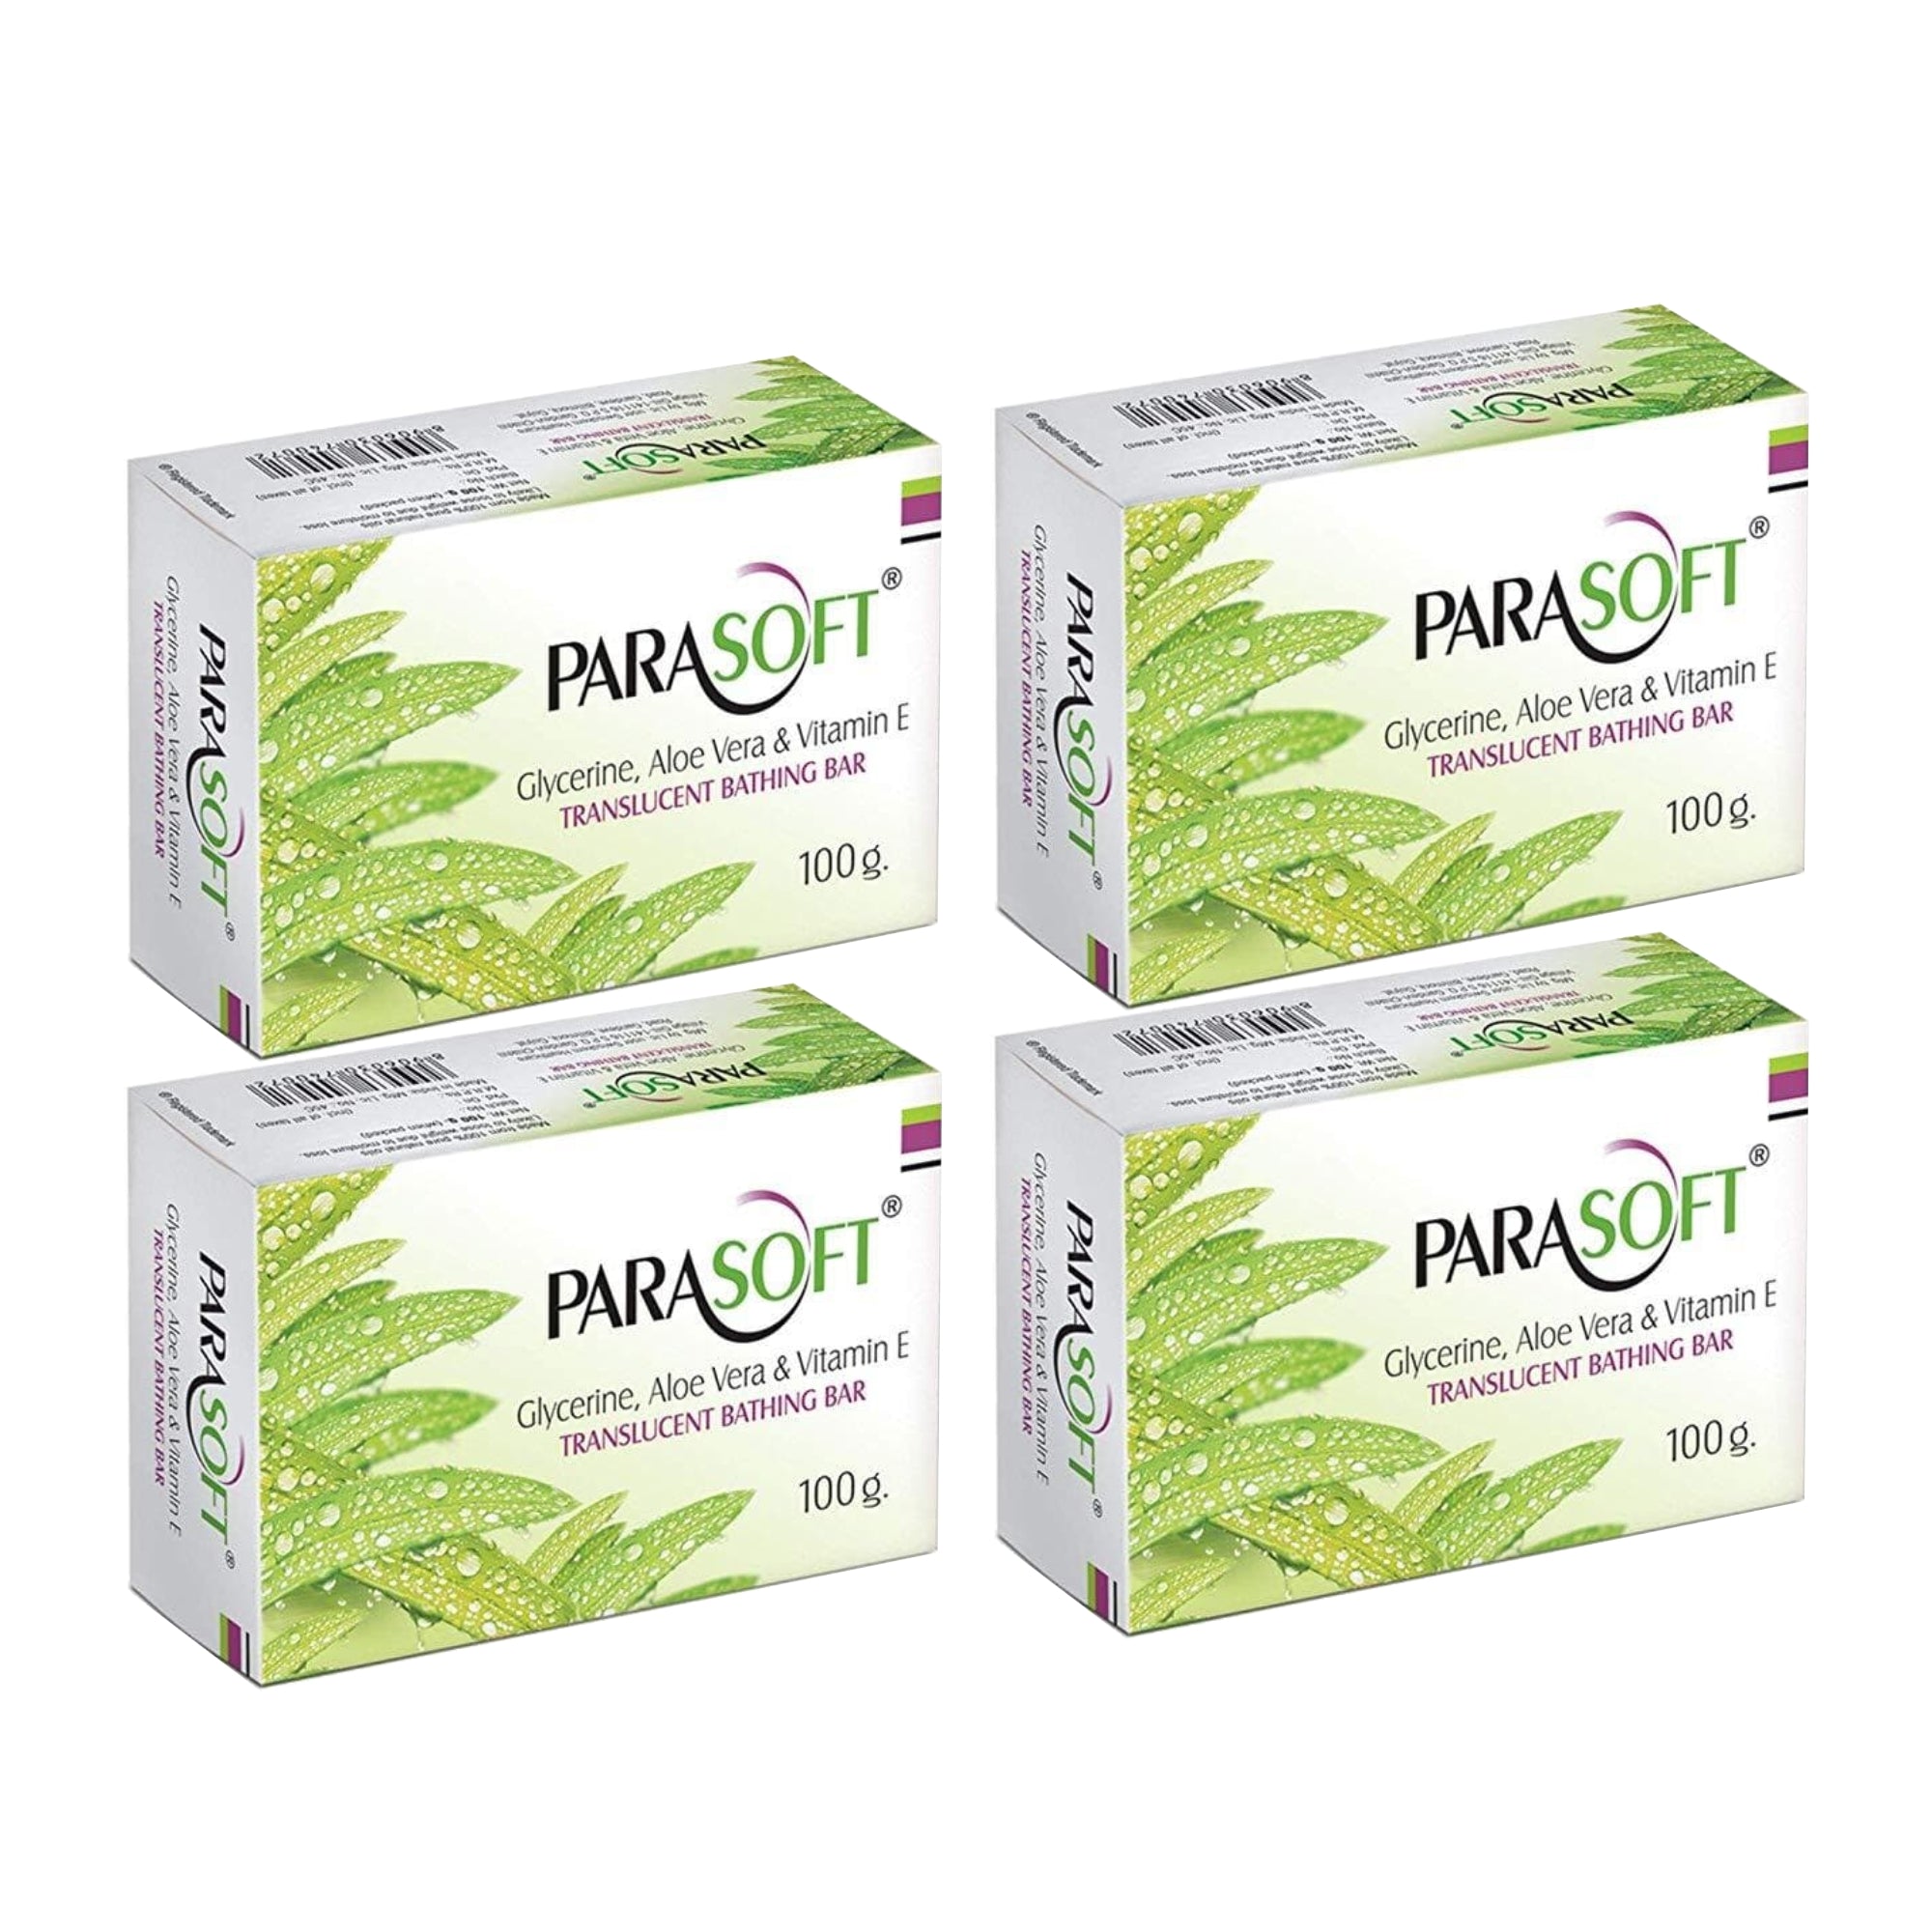  Parasoft soap for dry skin